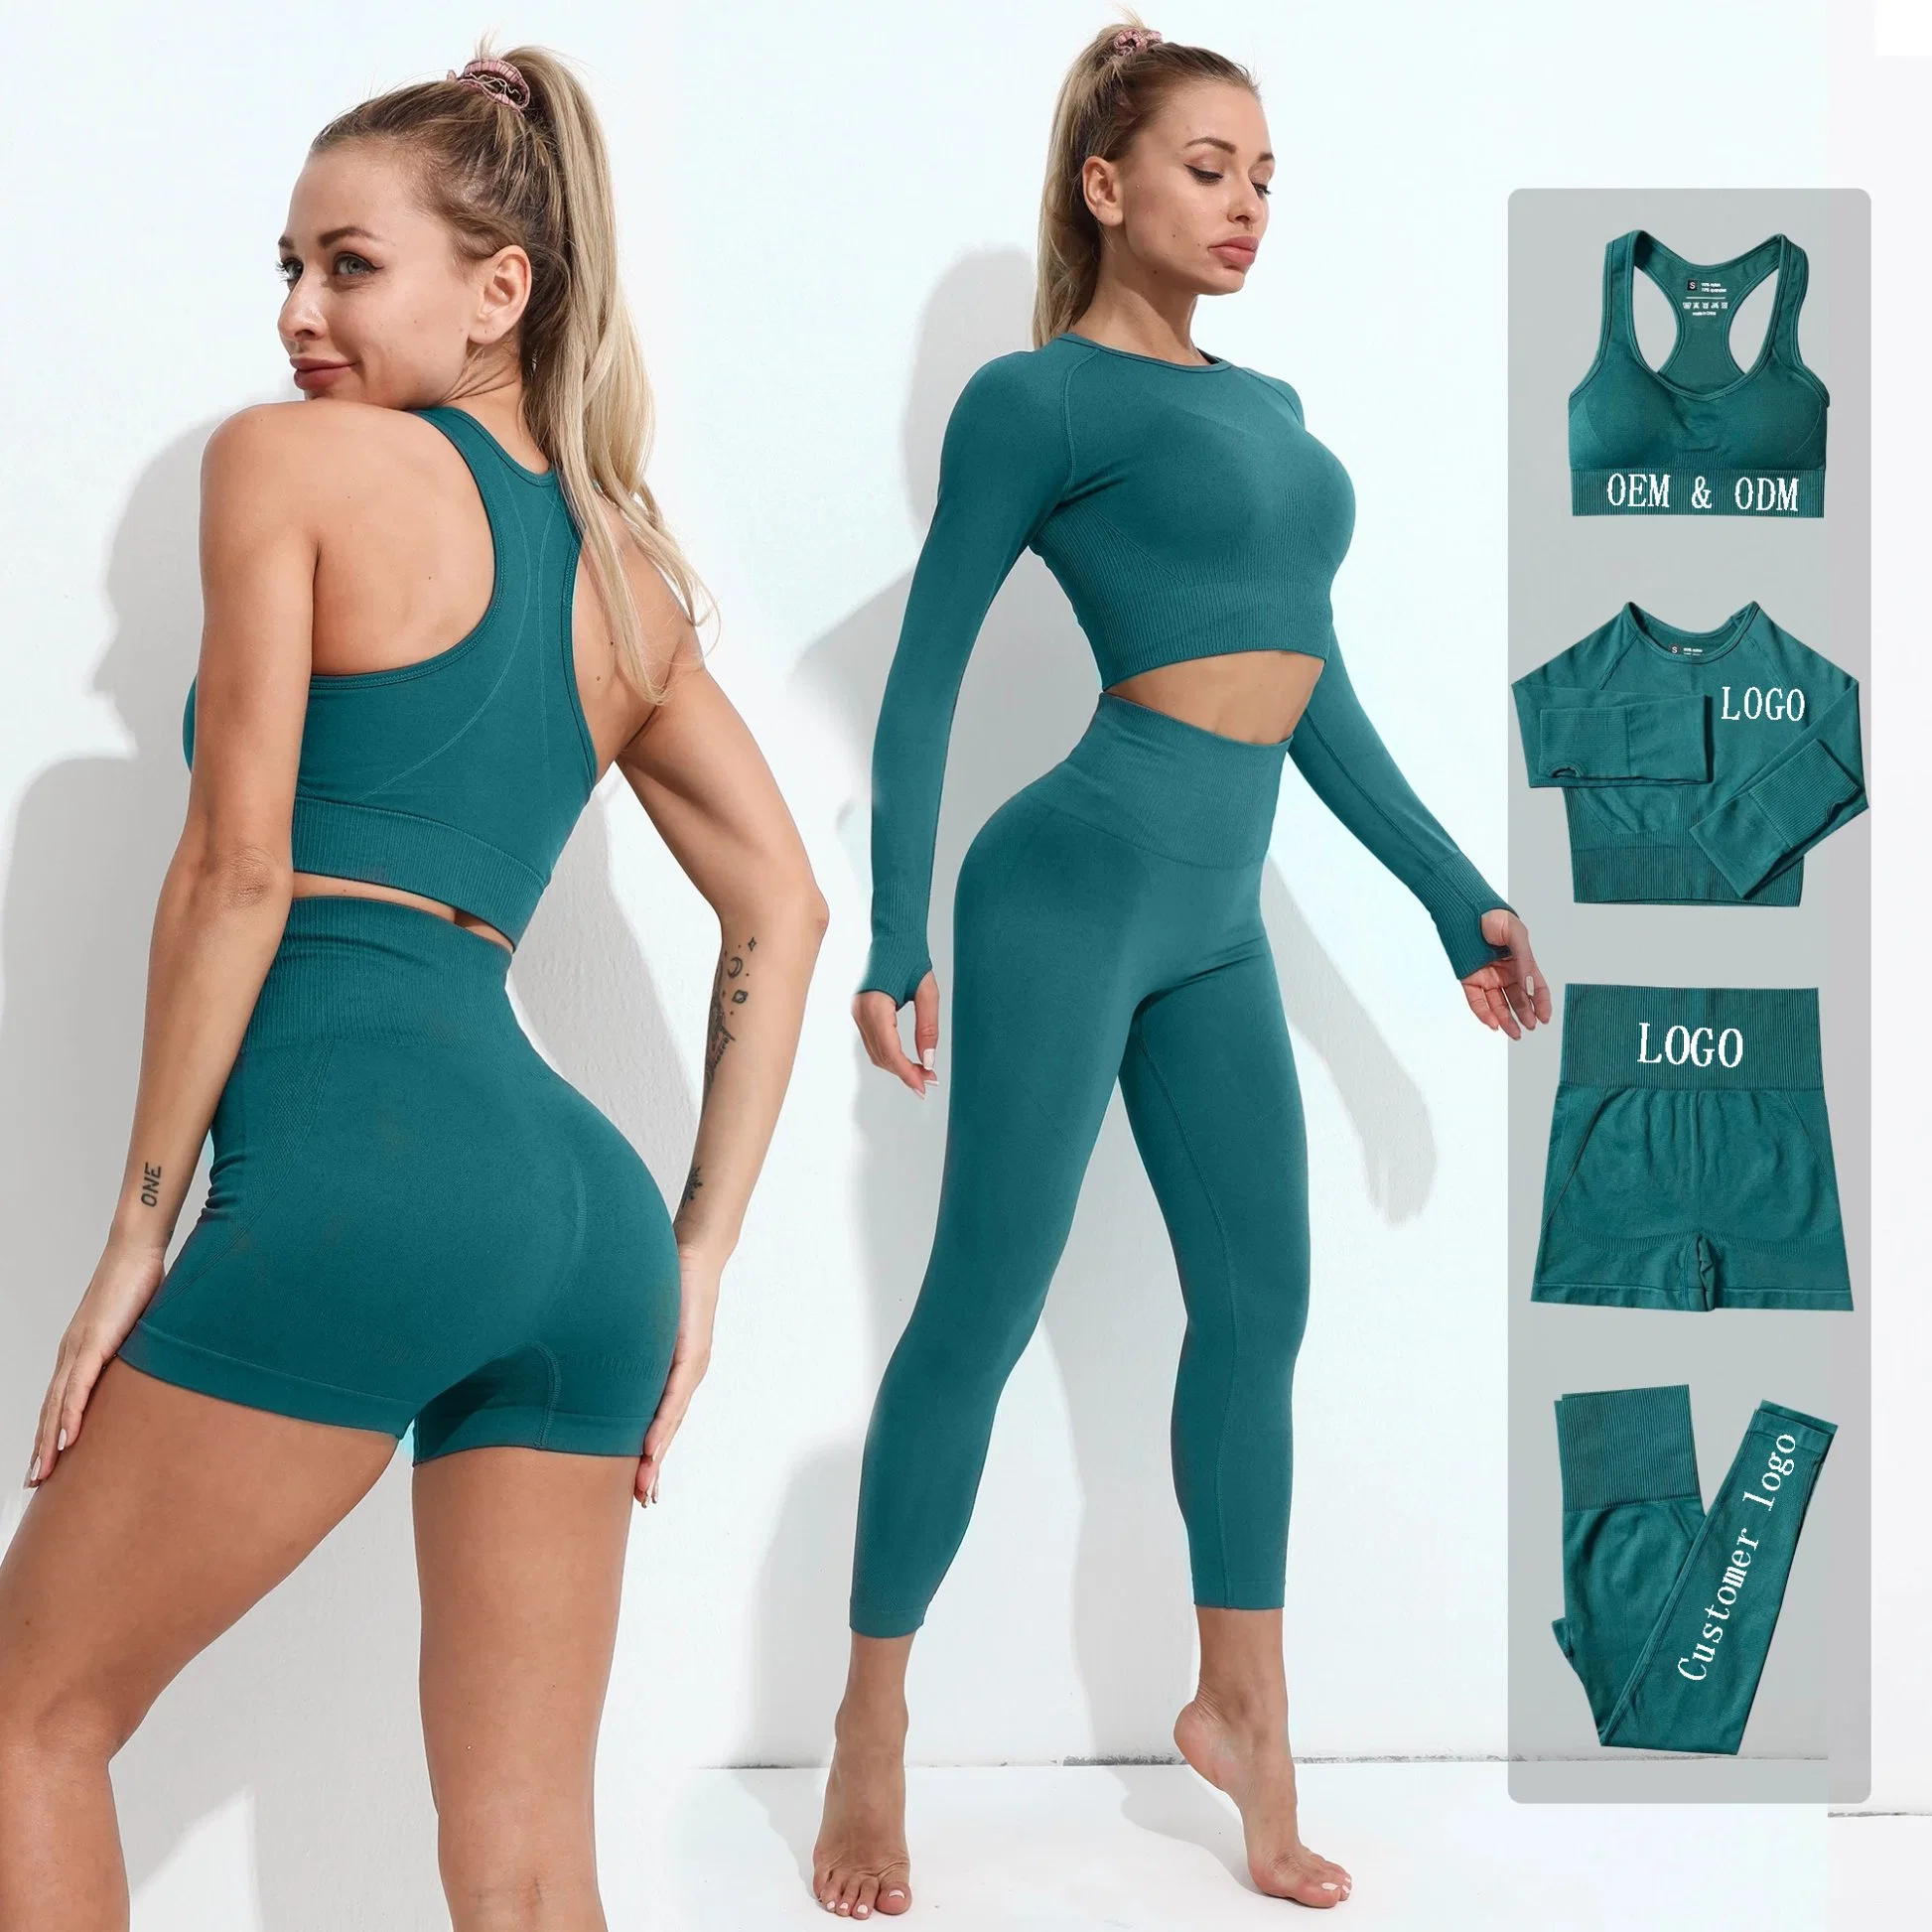 4CS Womens Active Wear Workout Sport Clothing Exercise Sportswear Workout Long Sleeves Seamless Gym Yoga Set Activewear Sport Suit for Women